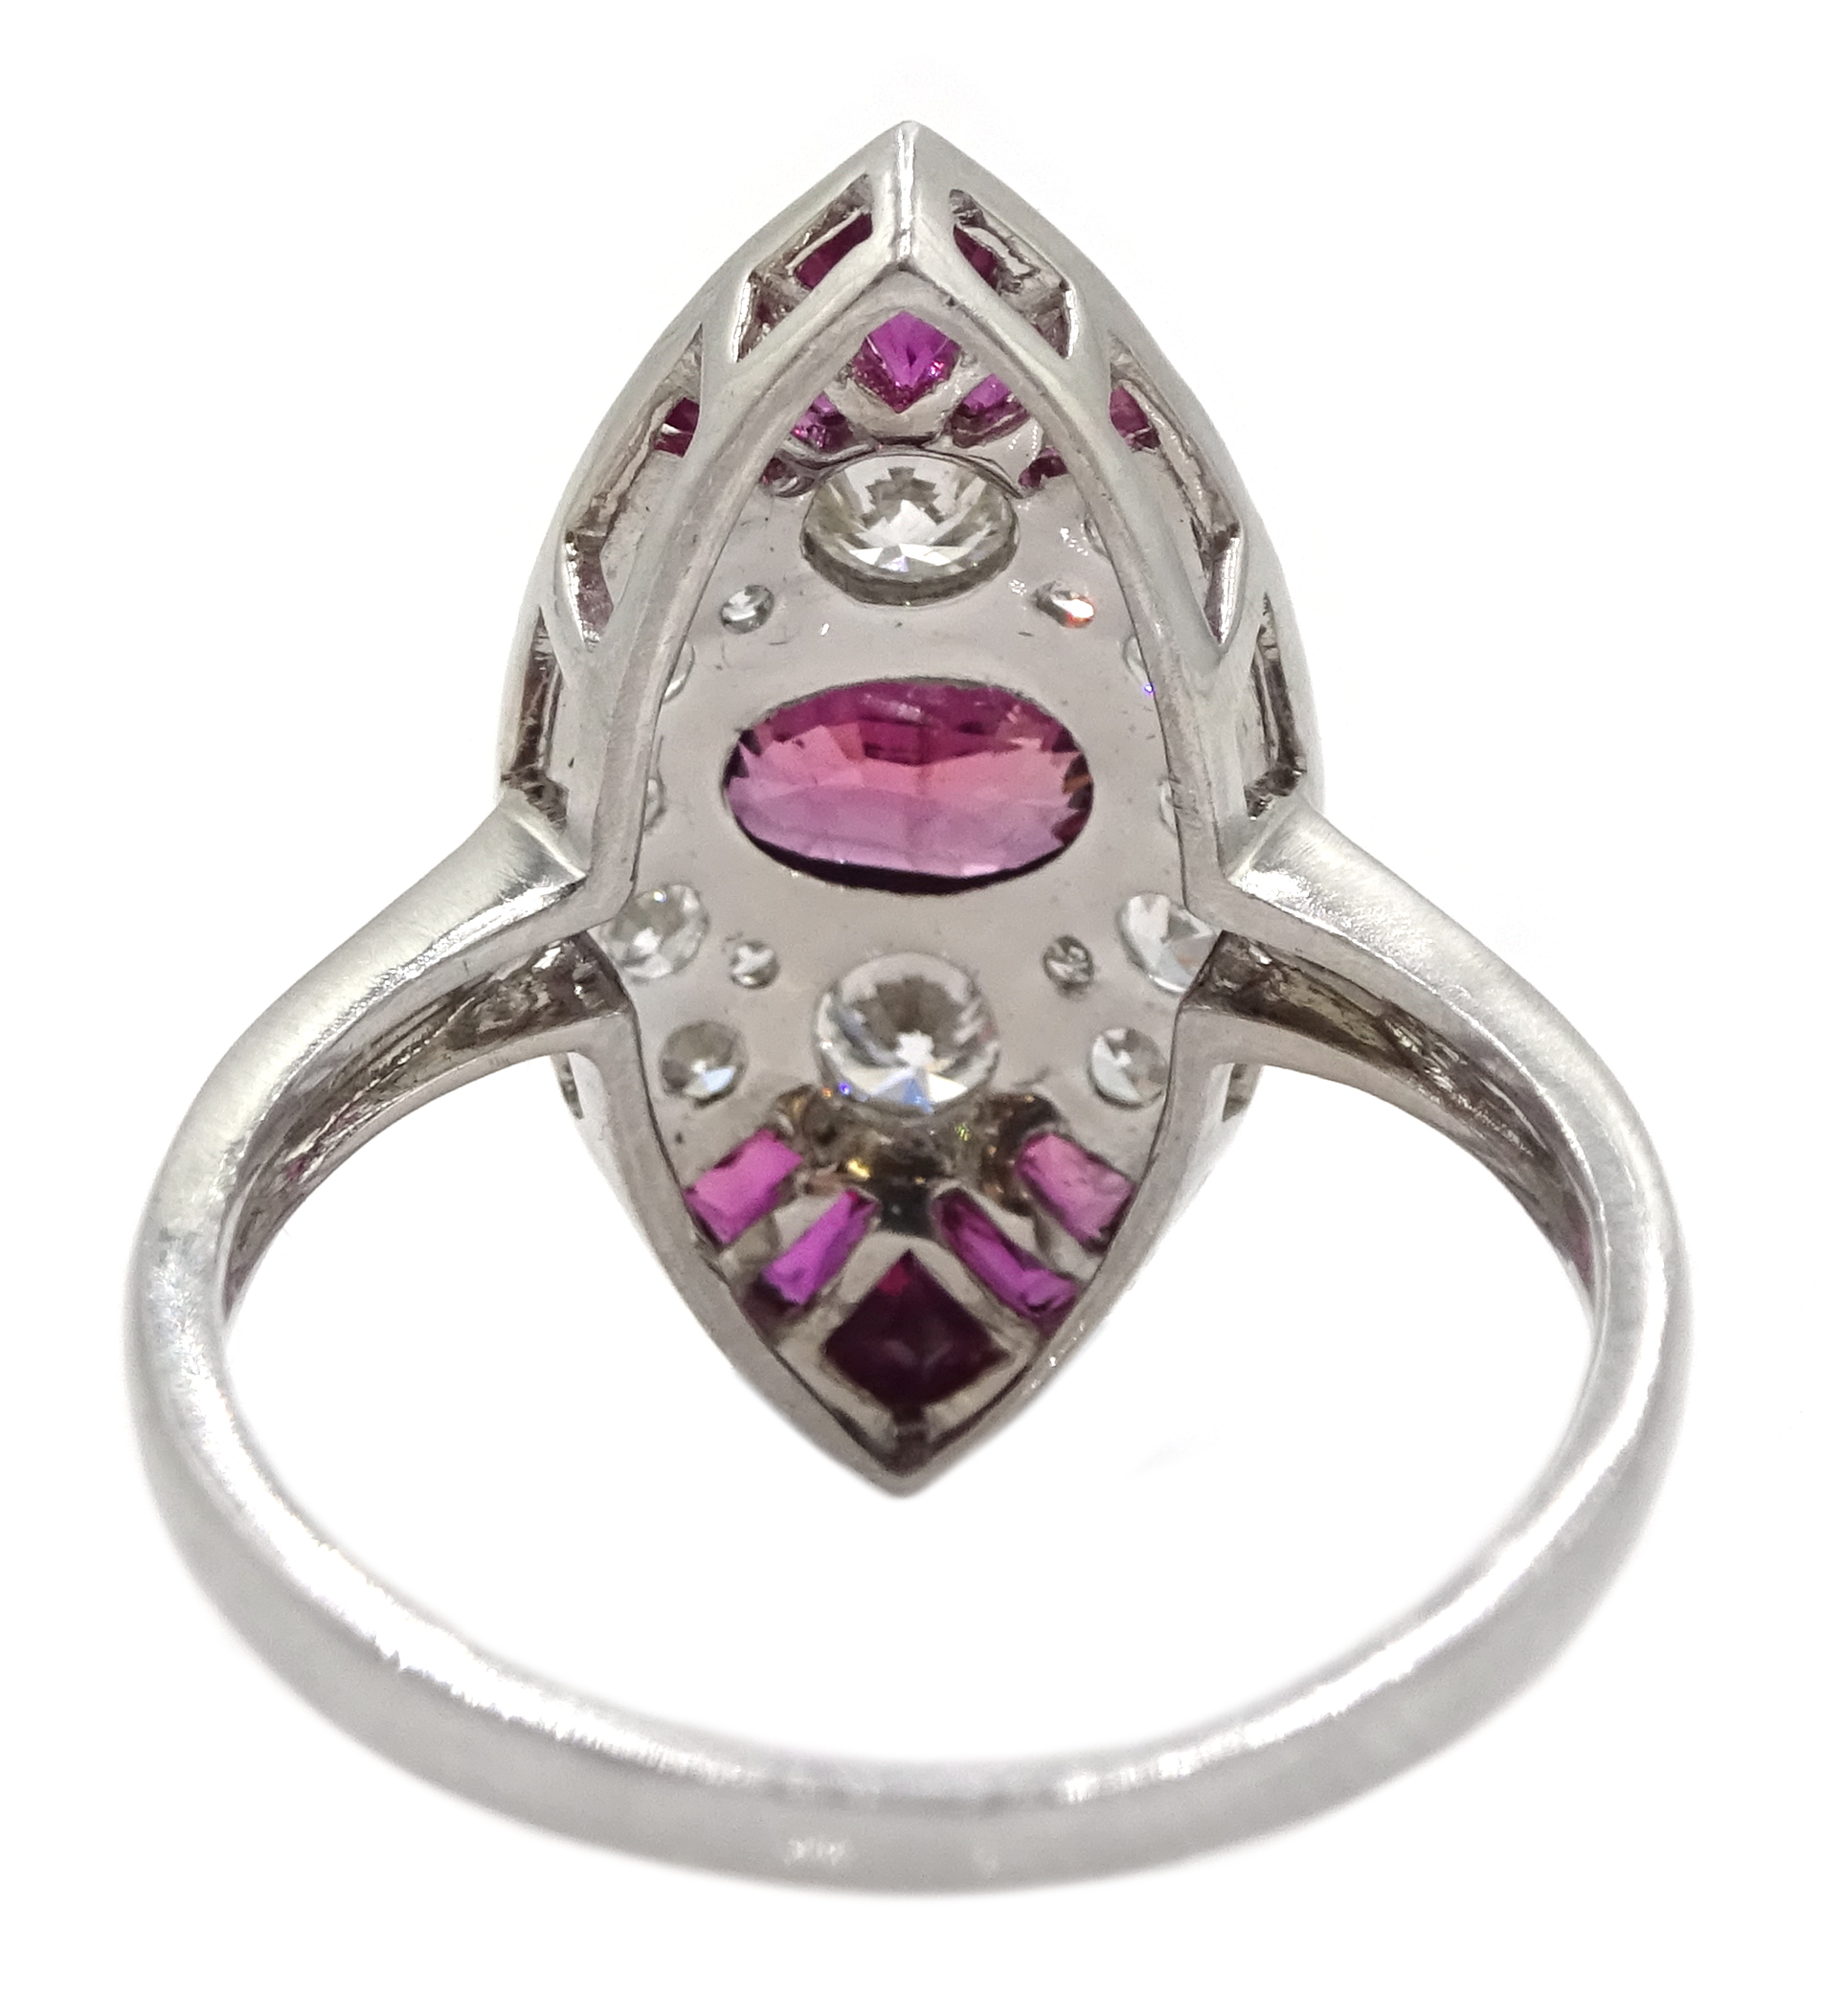 Victorian style marquise shaped platinum ring - Image 6 of 6